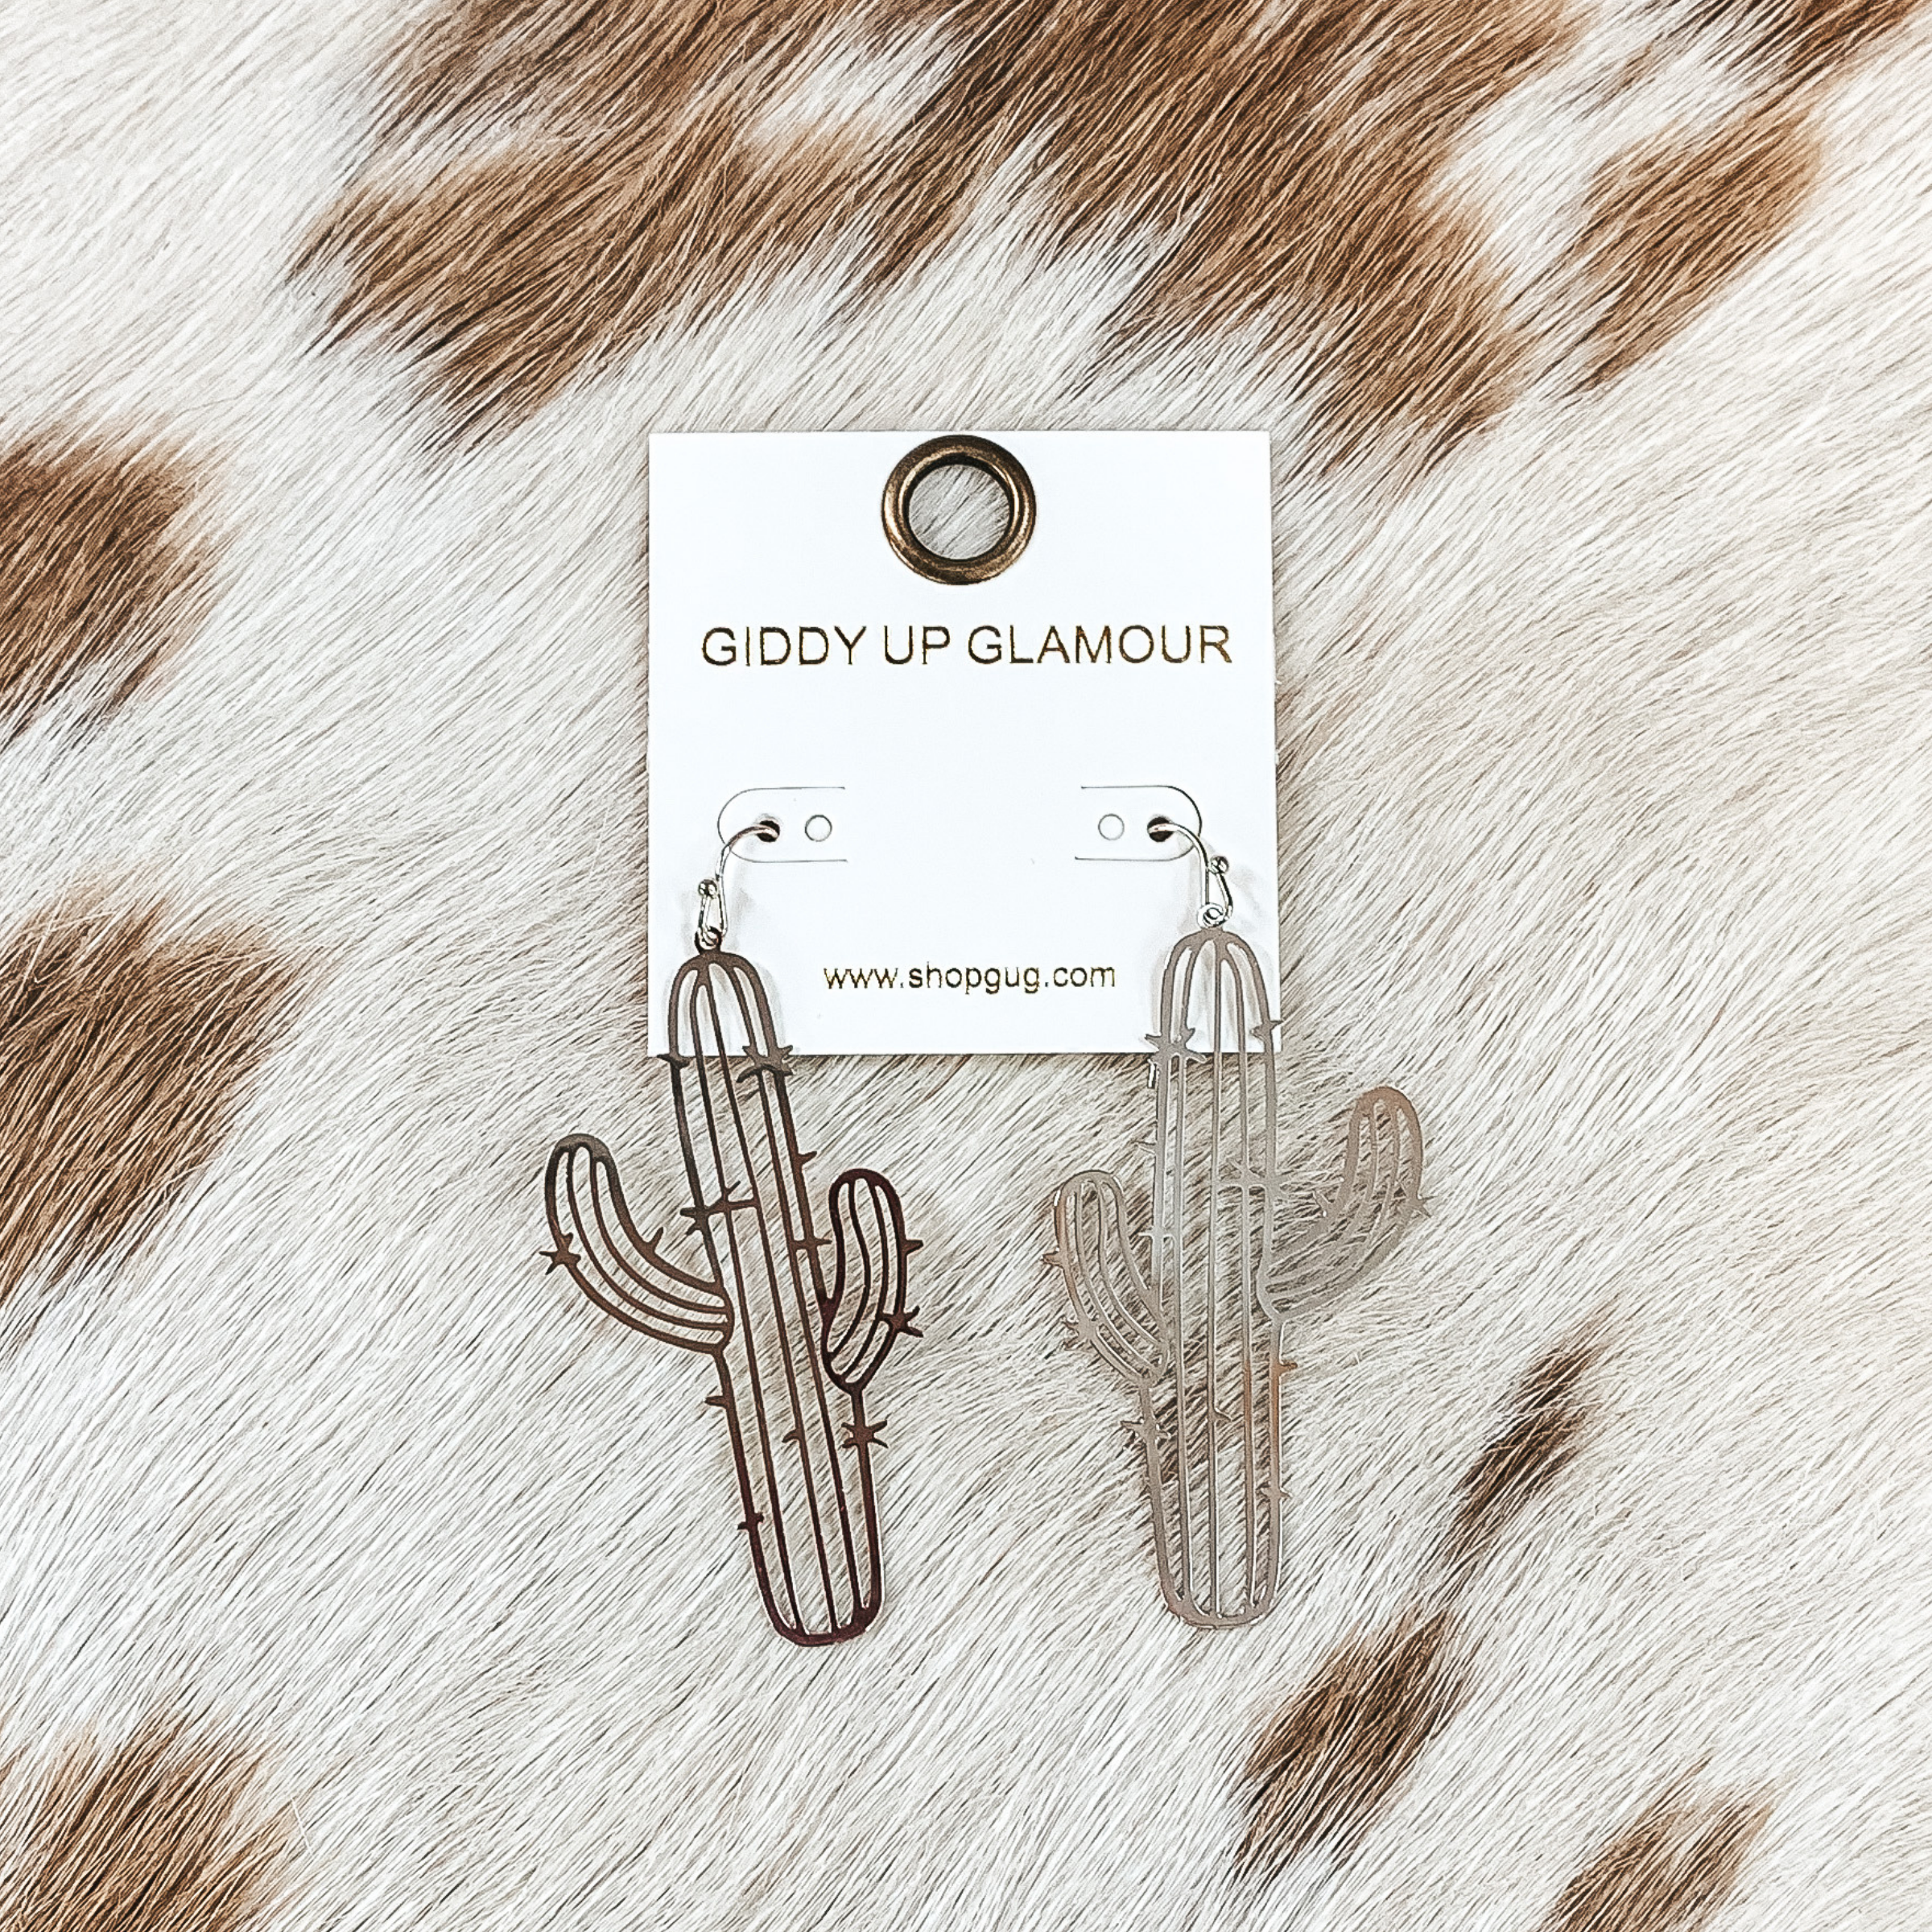 Desert Views Metal Cutout Earrings in Silver - Giddy Up Glamour Boutique